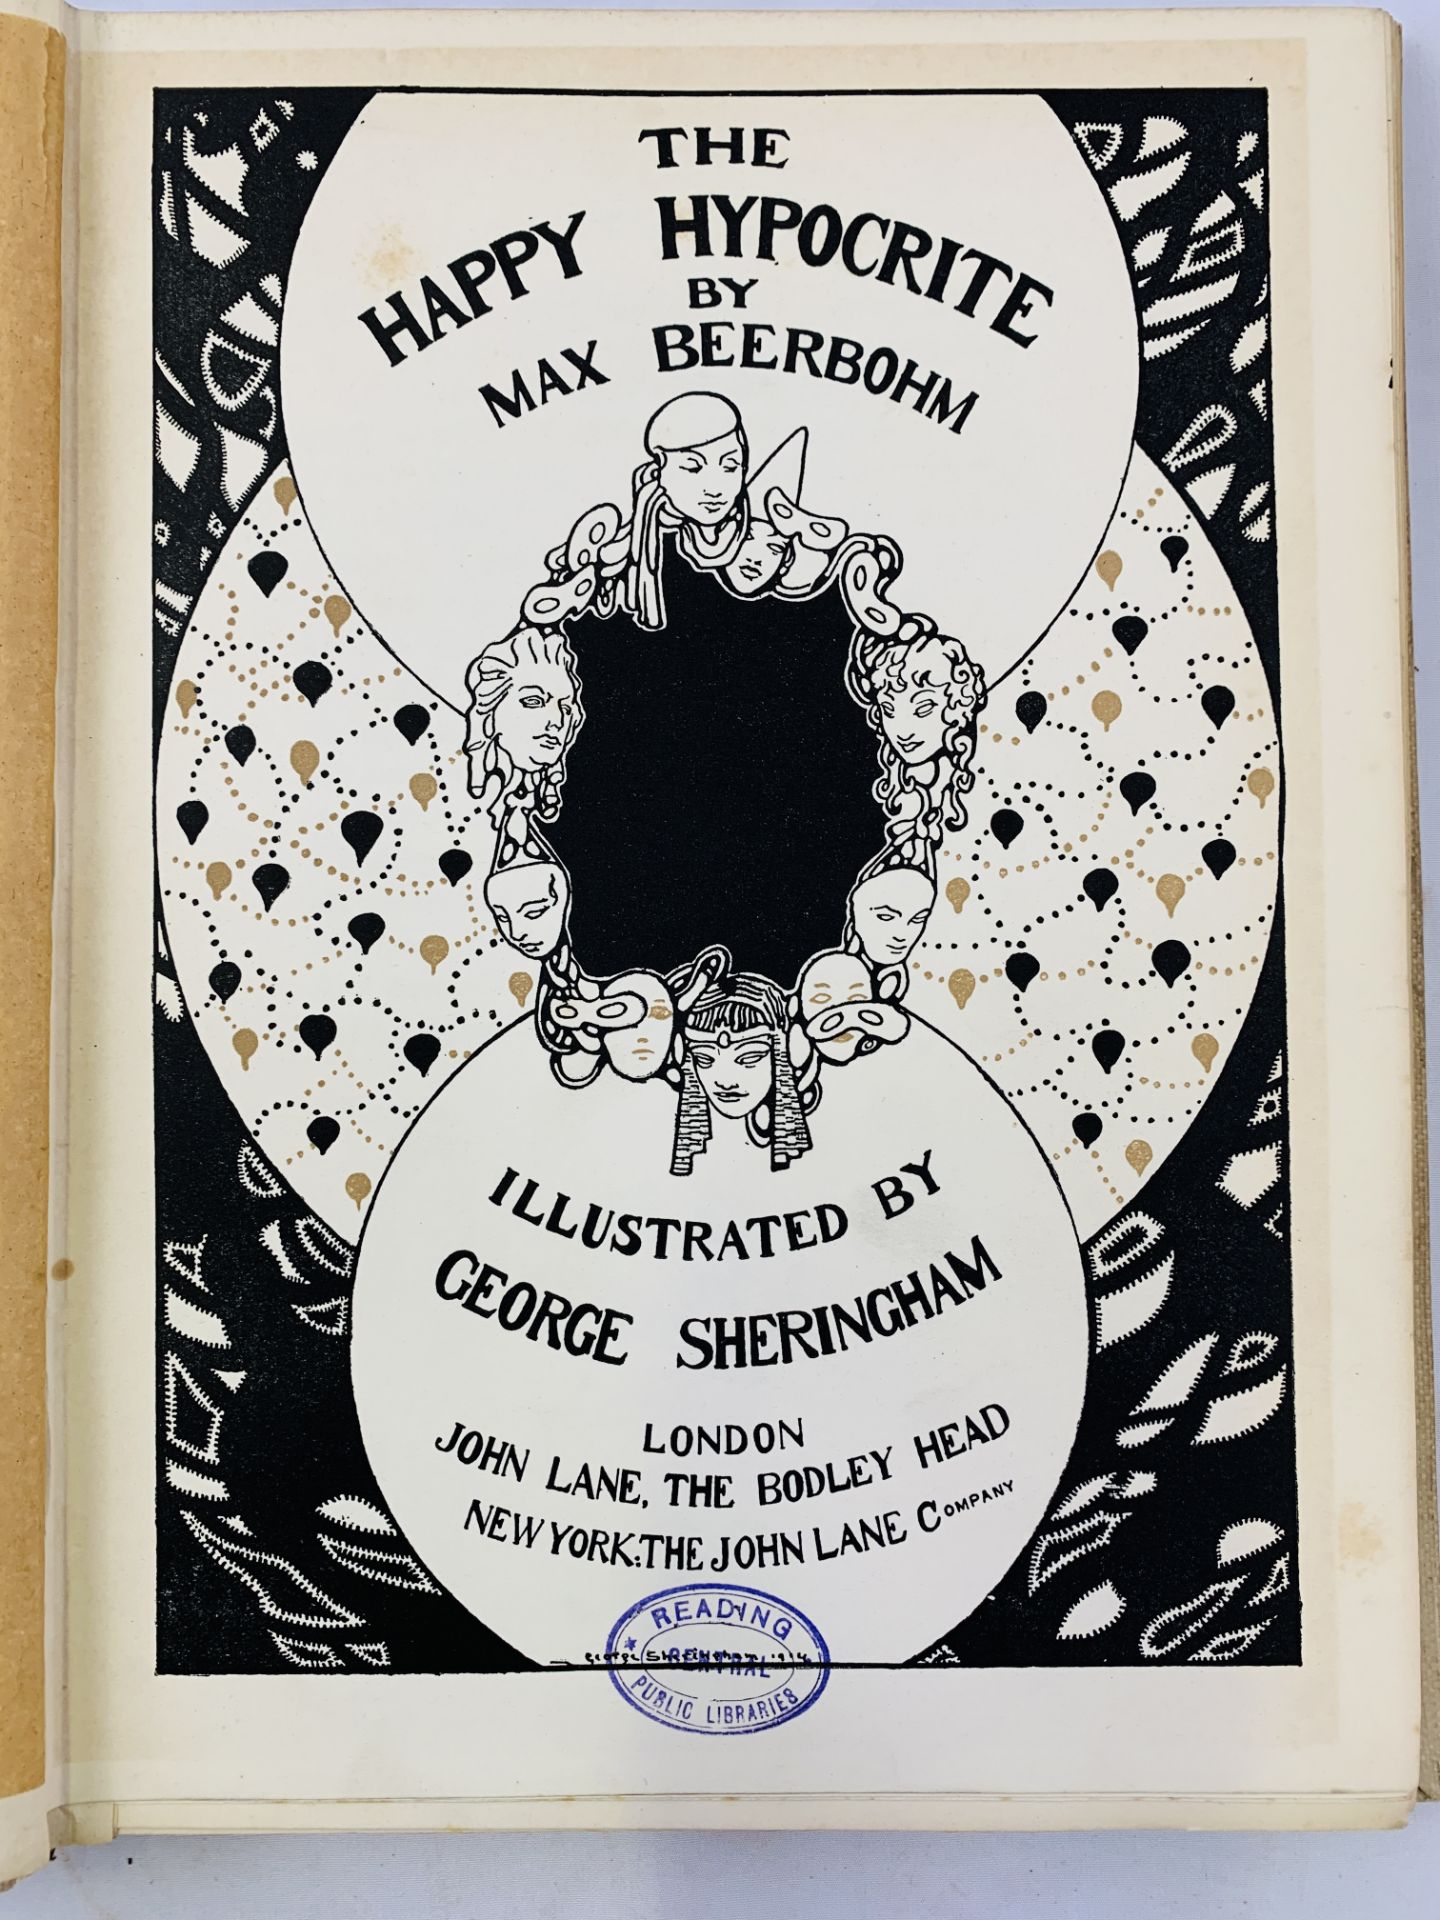 The Happy Hypocrite by Max Beerbohm and illustrated by George Sheringham, 1915 - Image 2 of 4